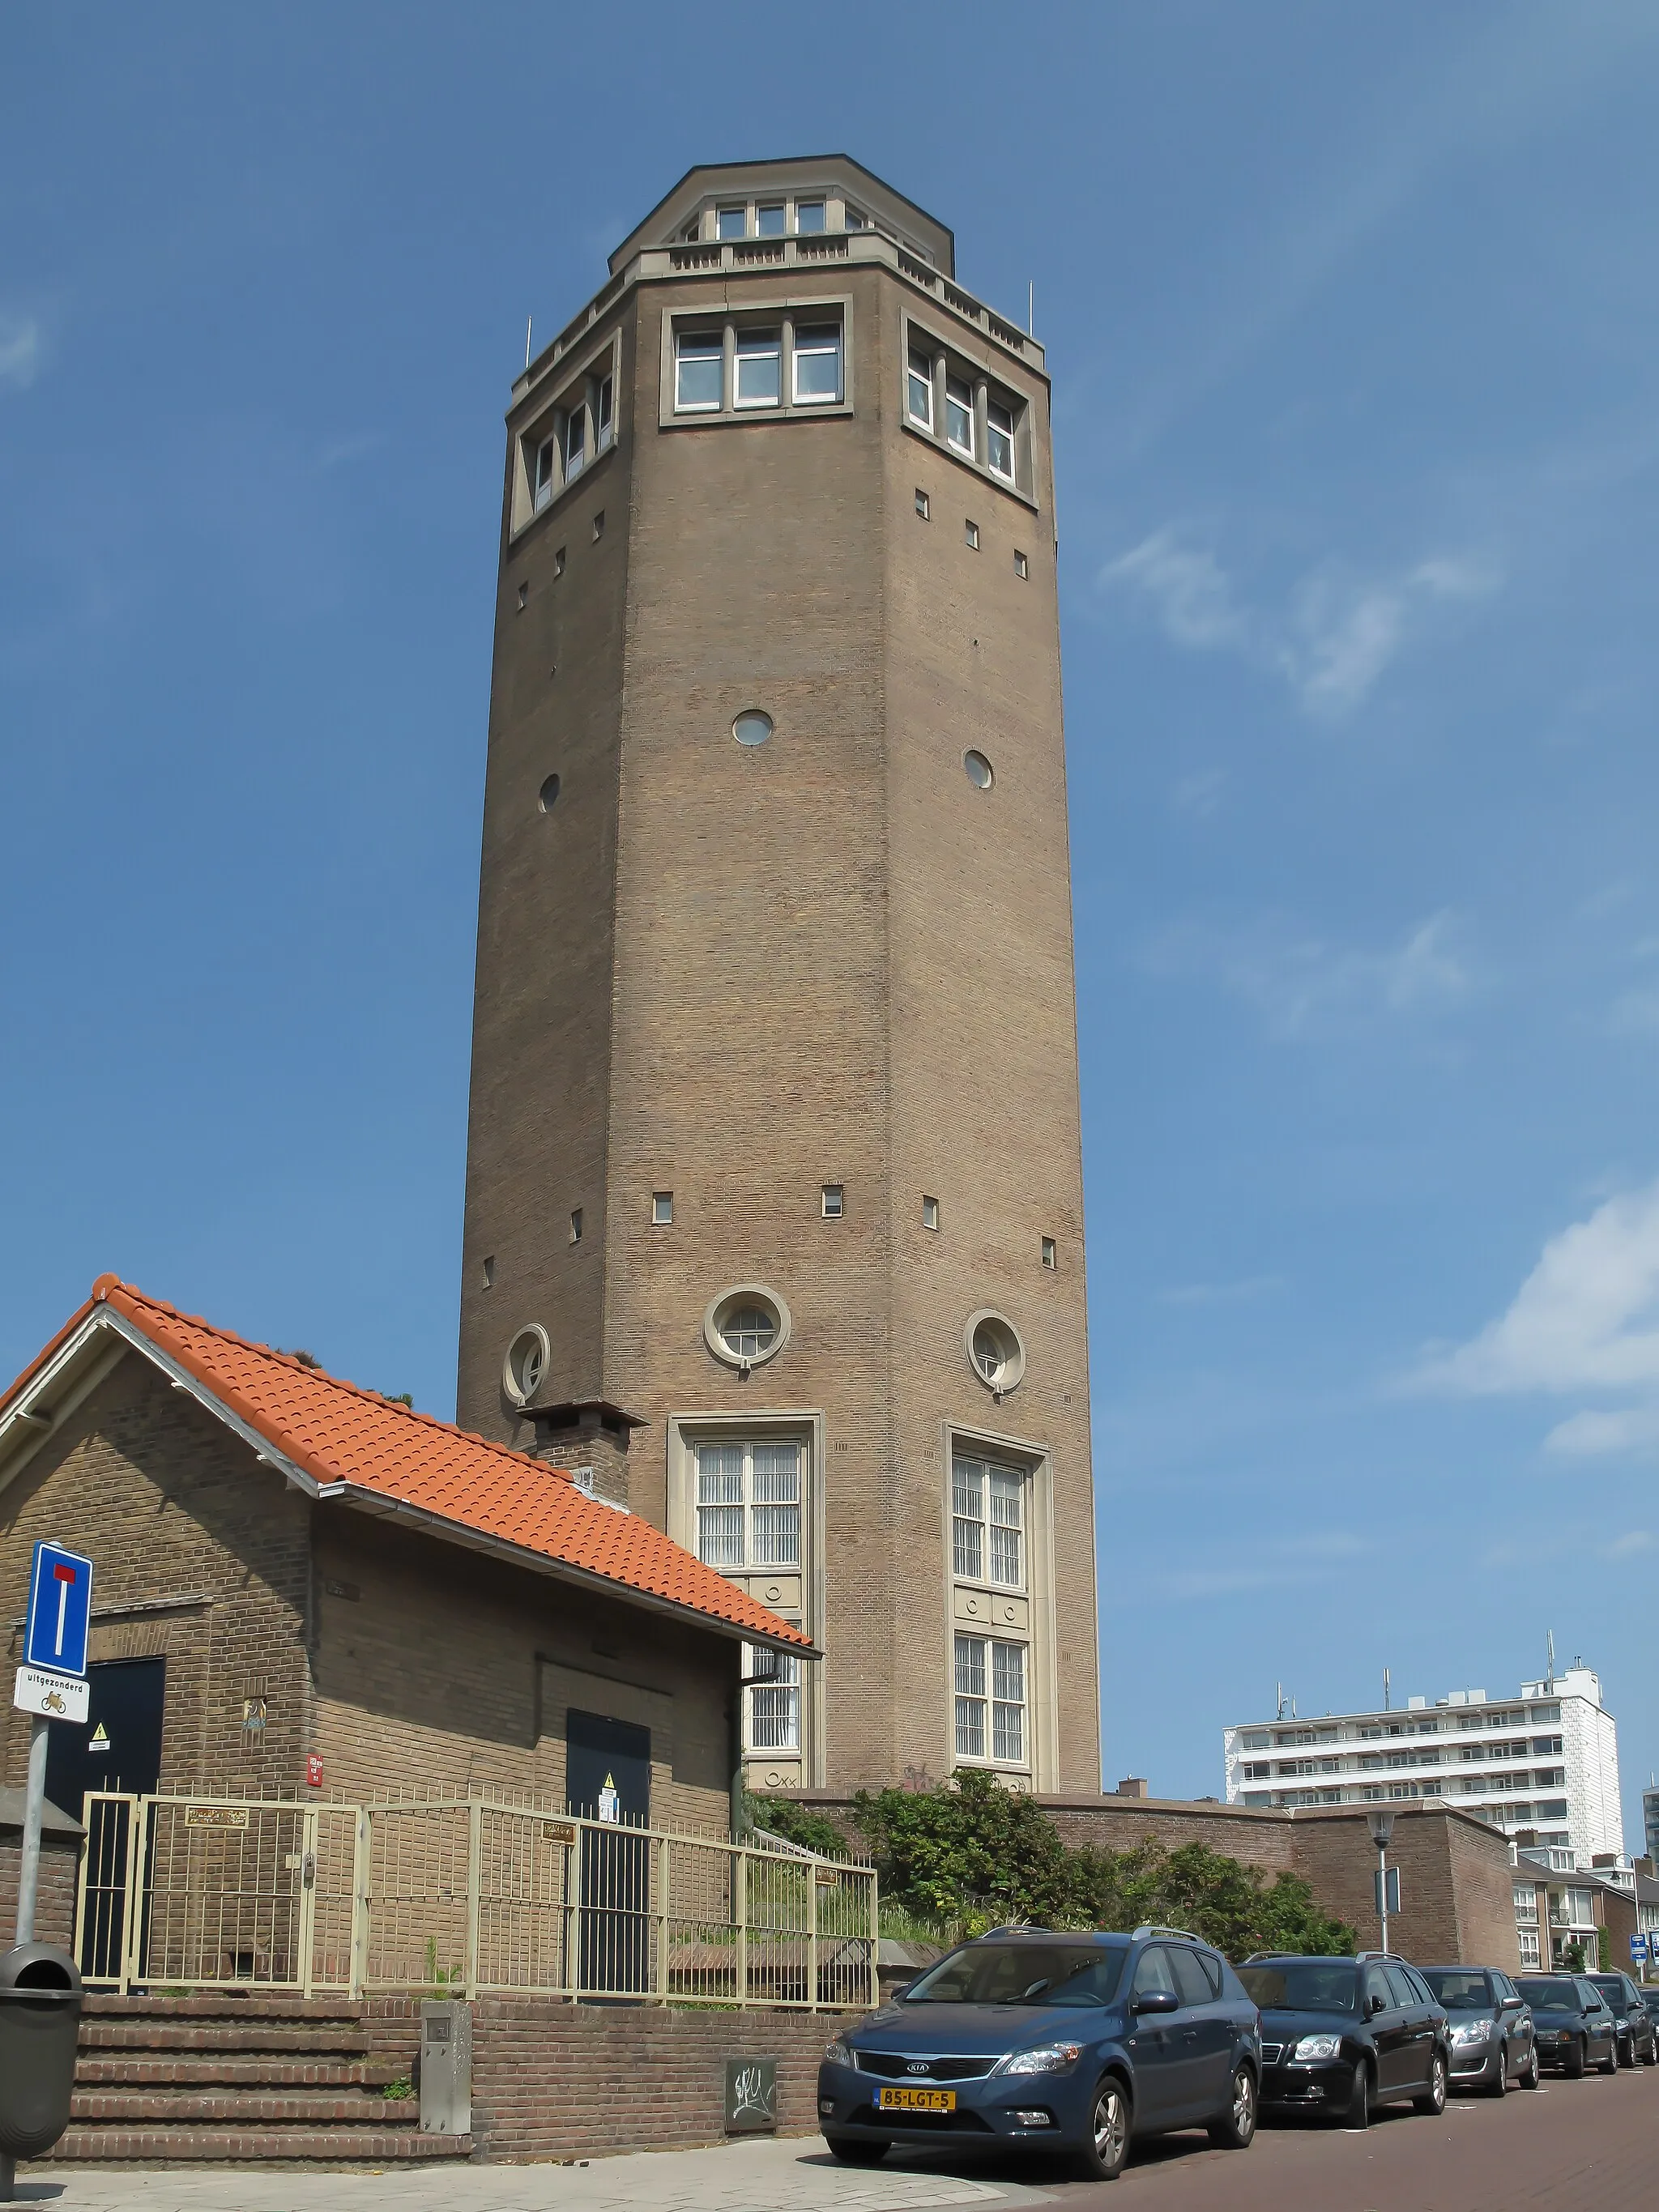 Photo showing: This is an image of a municipal monument in Zandvoort with number